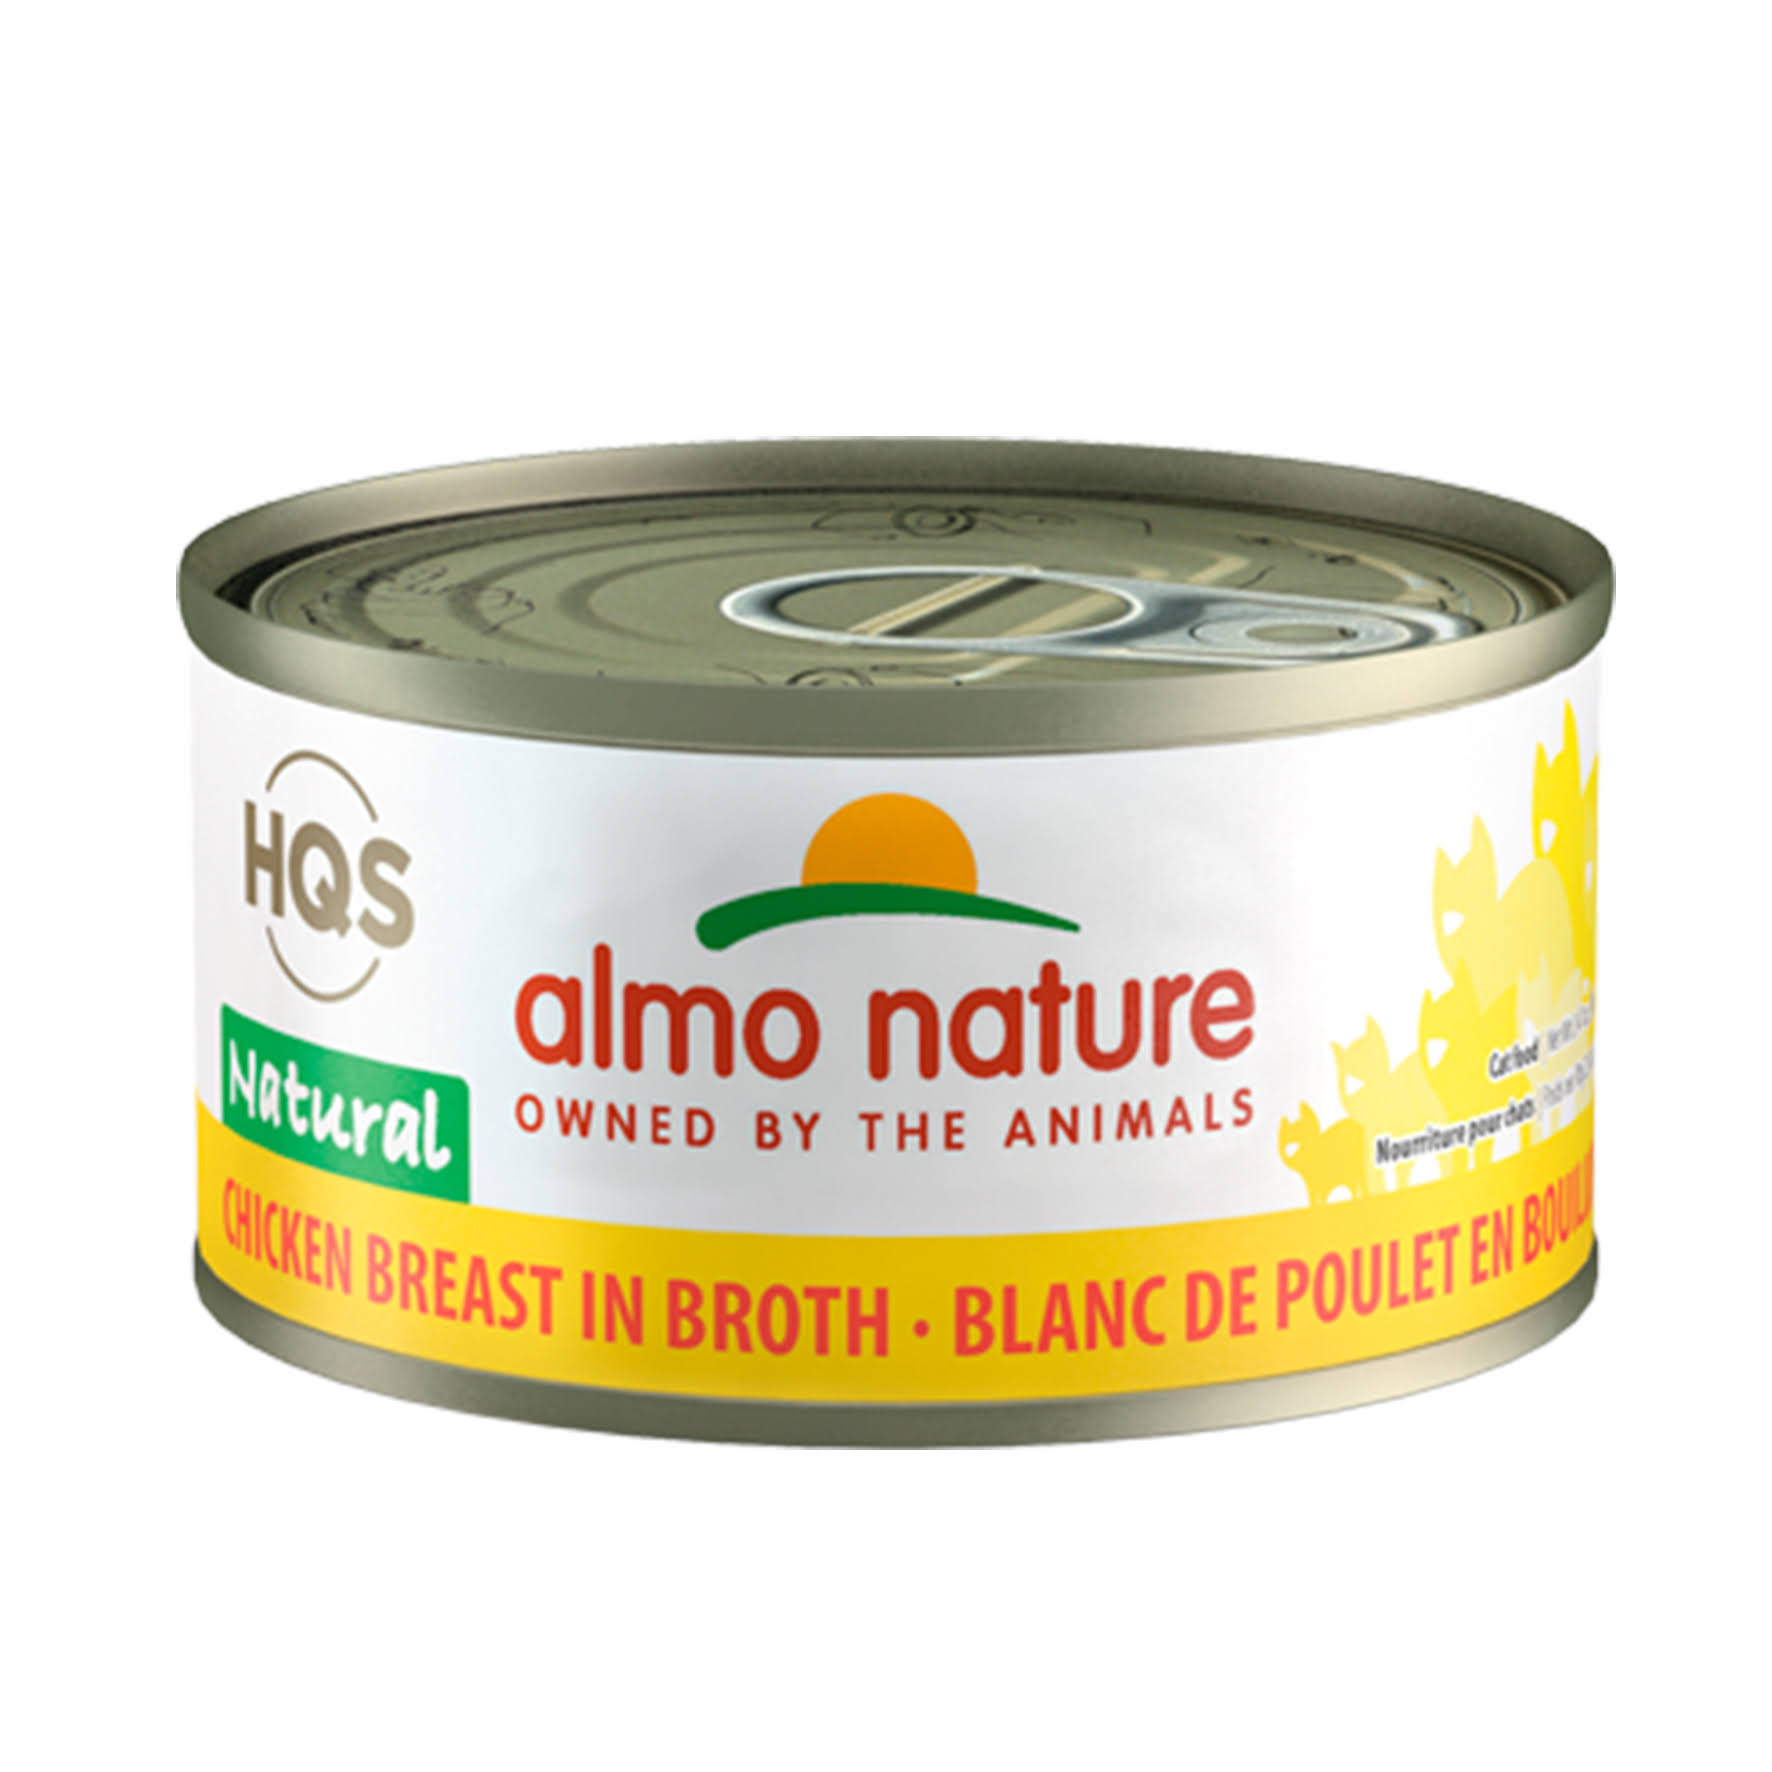 Almo Nature Pet Food - Natural Chicken Breast